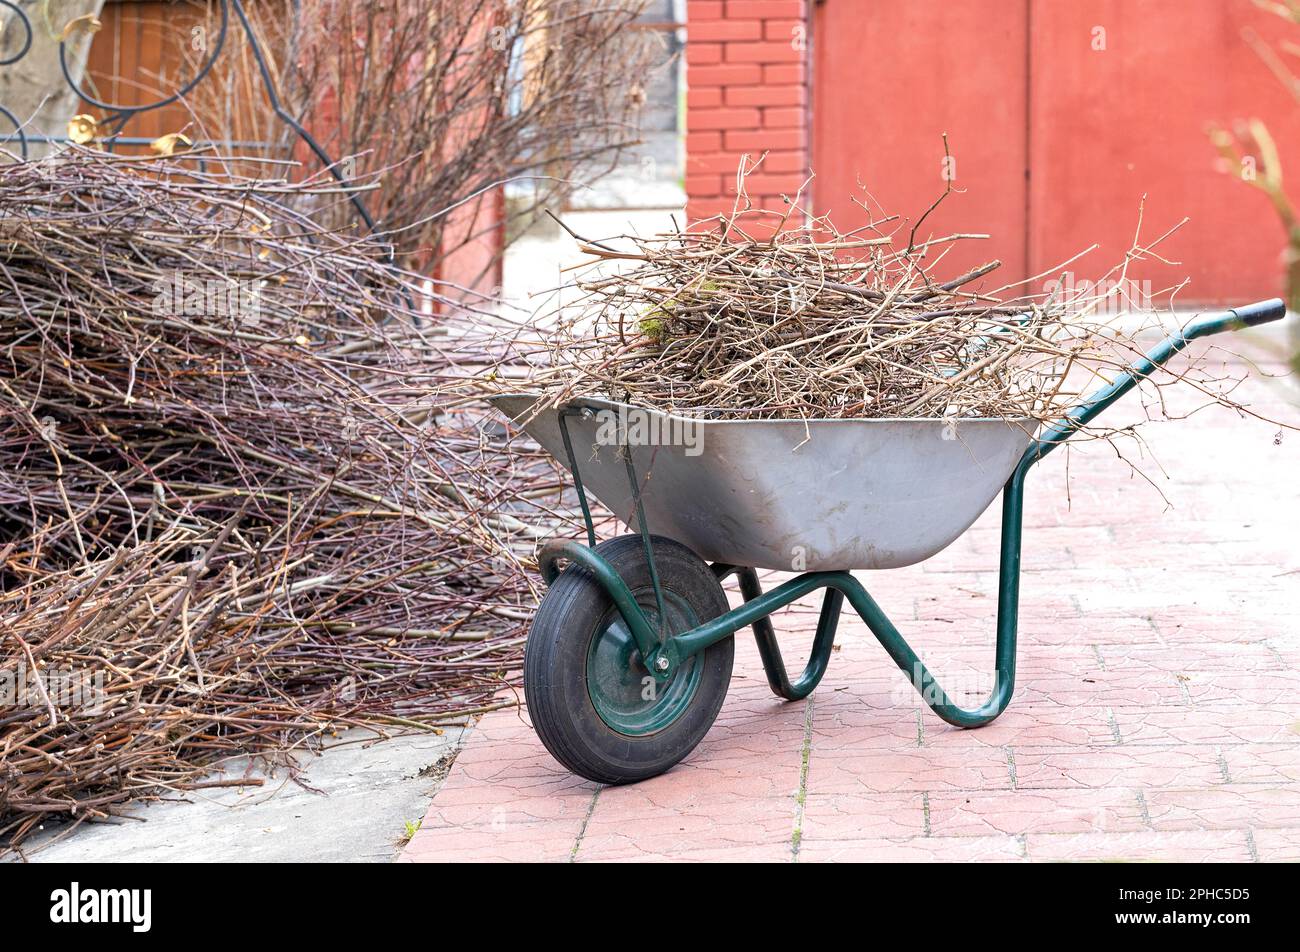 Spring pruning of trees in the garden. Cut branches on a garden wheelbarrow are piled up for further processing. Stock Photo